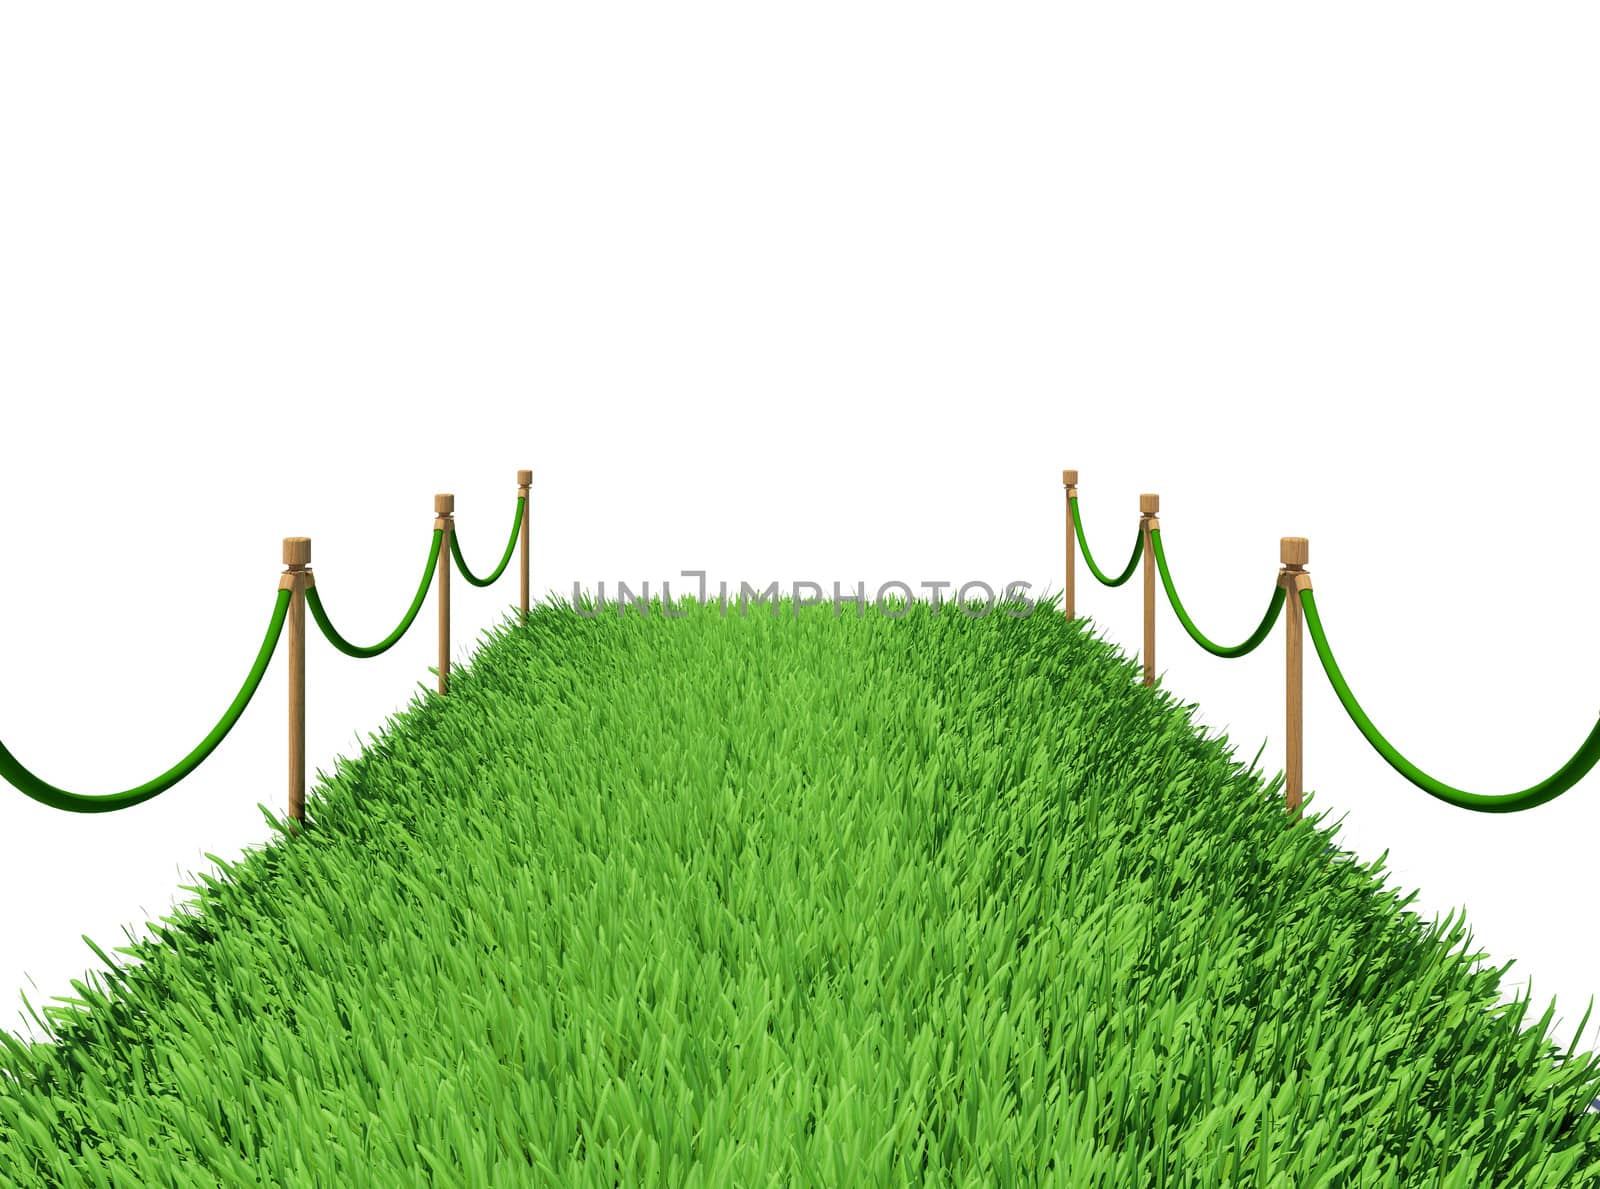 Path of green grass. 3d rendering on white background